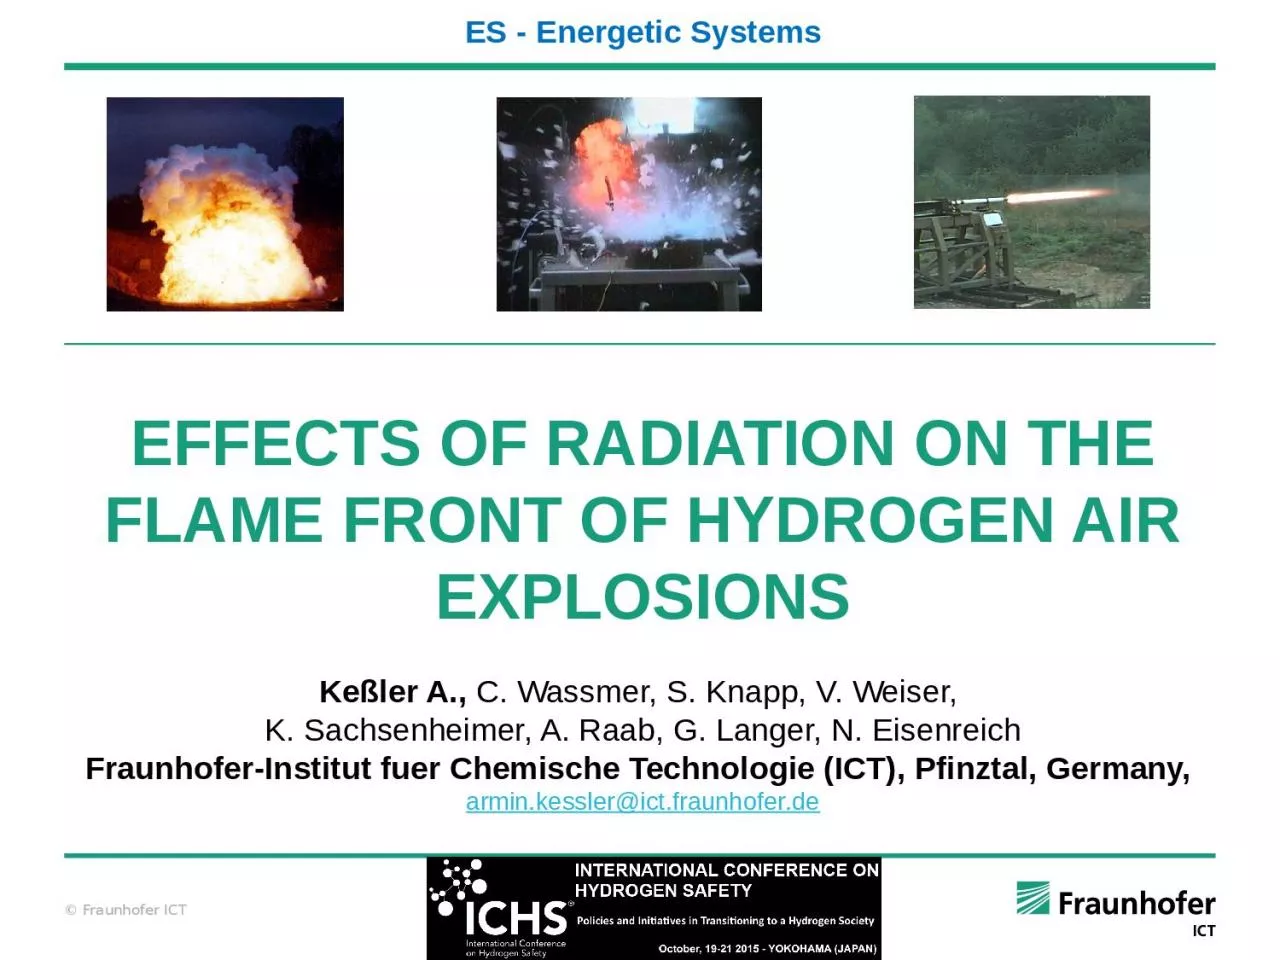 Effects of Radiation on the flame front of hydrogen air explosions